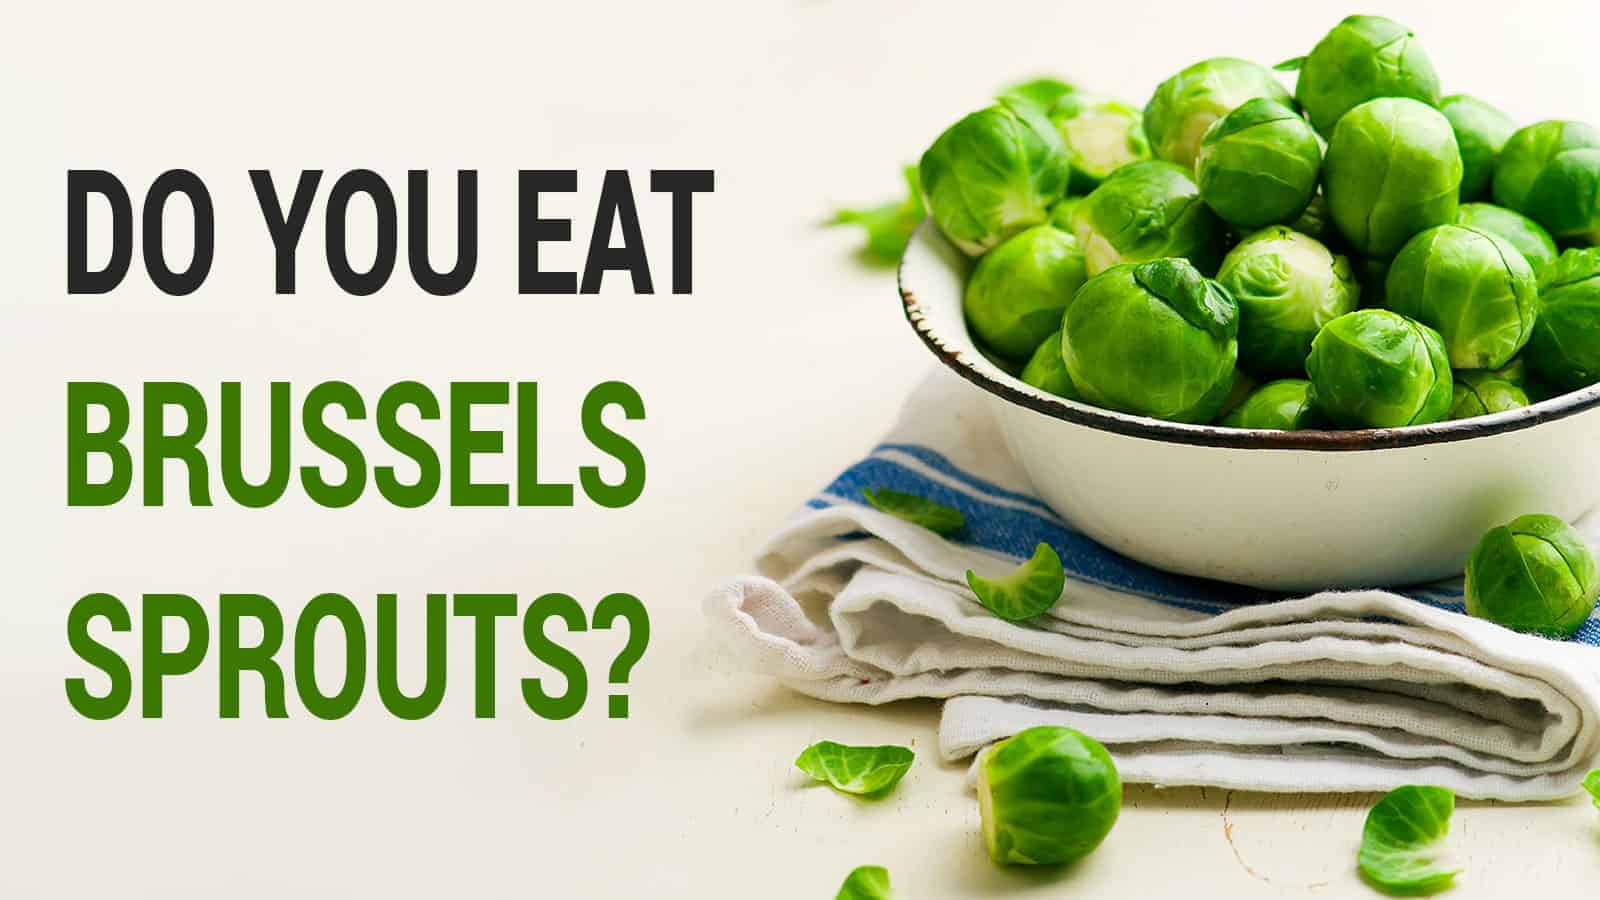 Scientists Explain What Happens To Your Body When You Eat Brussels Sprouts Every Day